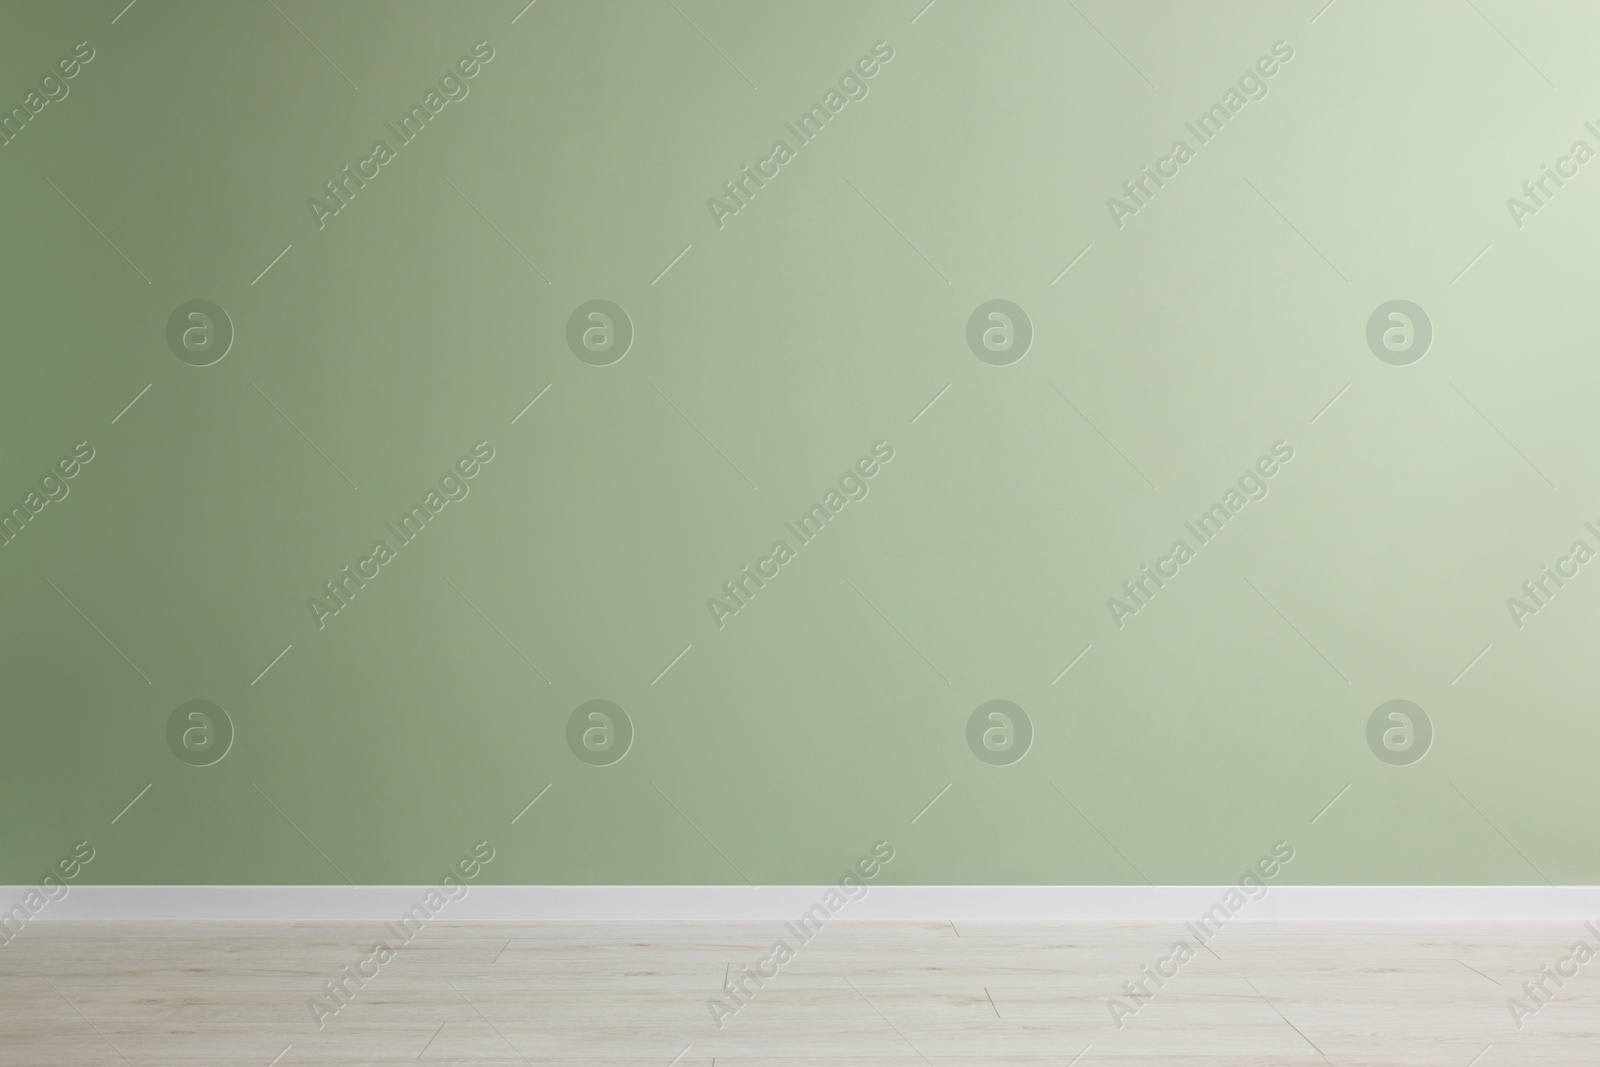 Photo of Empty room with green wall and wooden floor